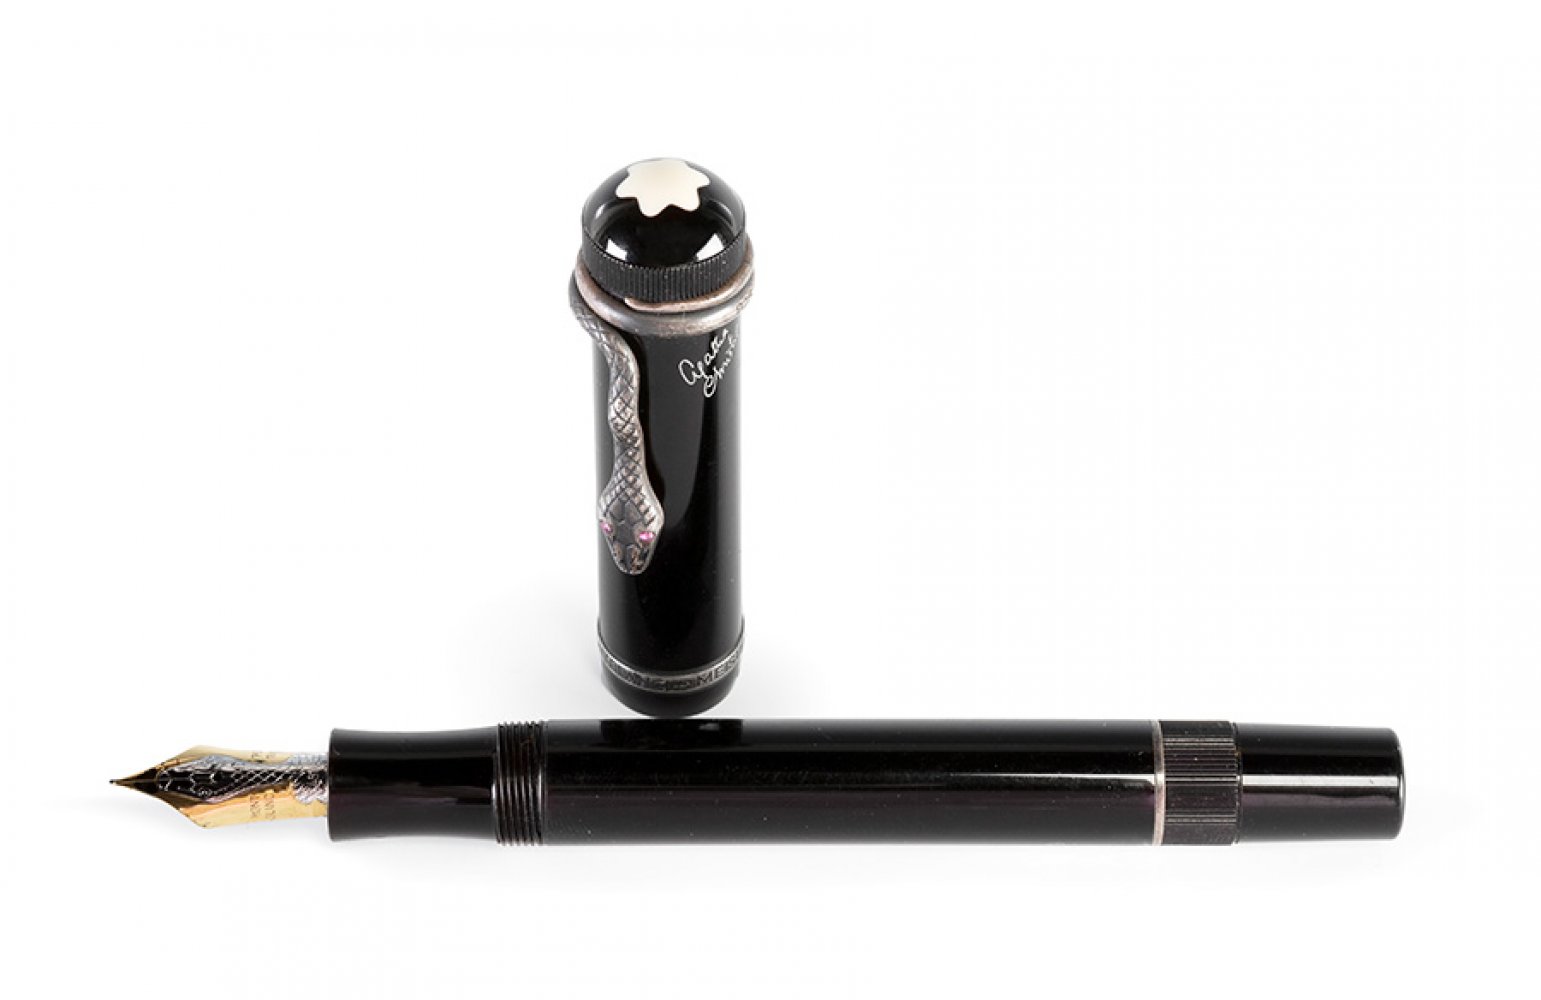 MONTBLANC Agatha Christie pen. Limited edition.Black resin barrel and cap inspired by a classic - Image 2 of 4